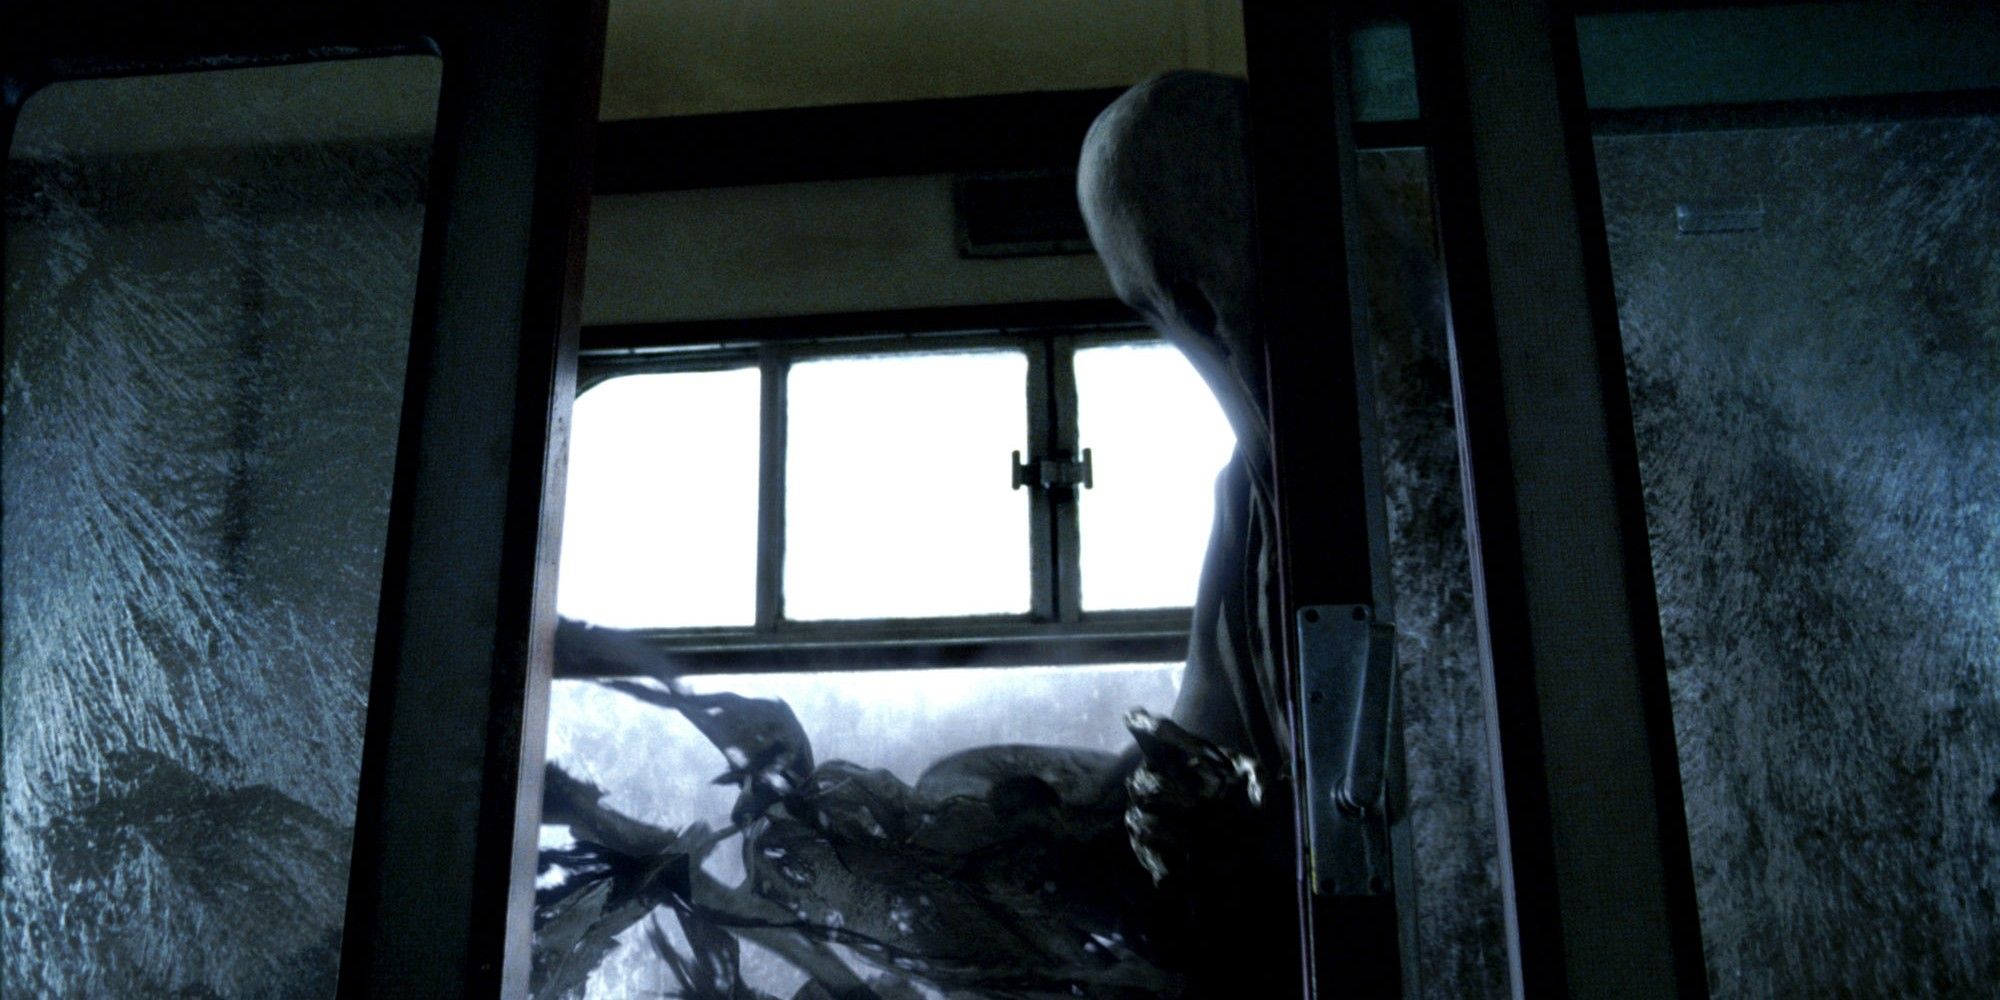 Dementor on the train in 'Harry Potter'